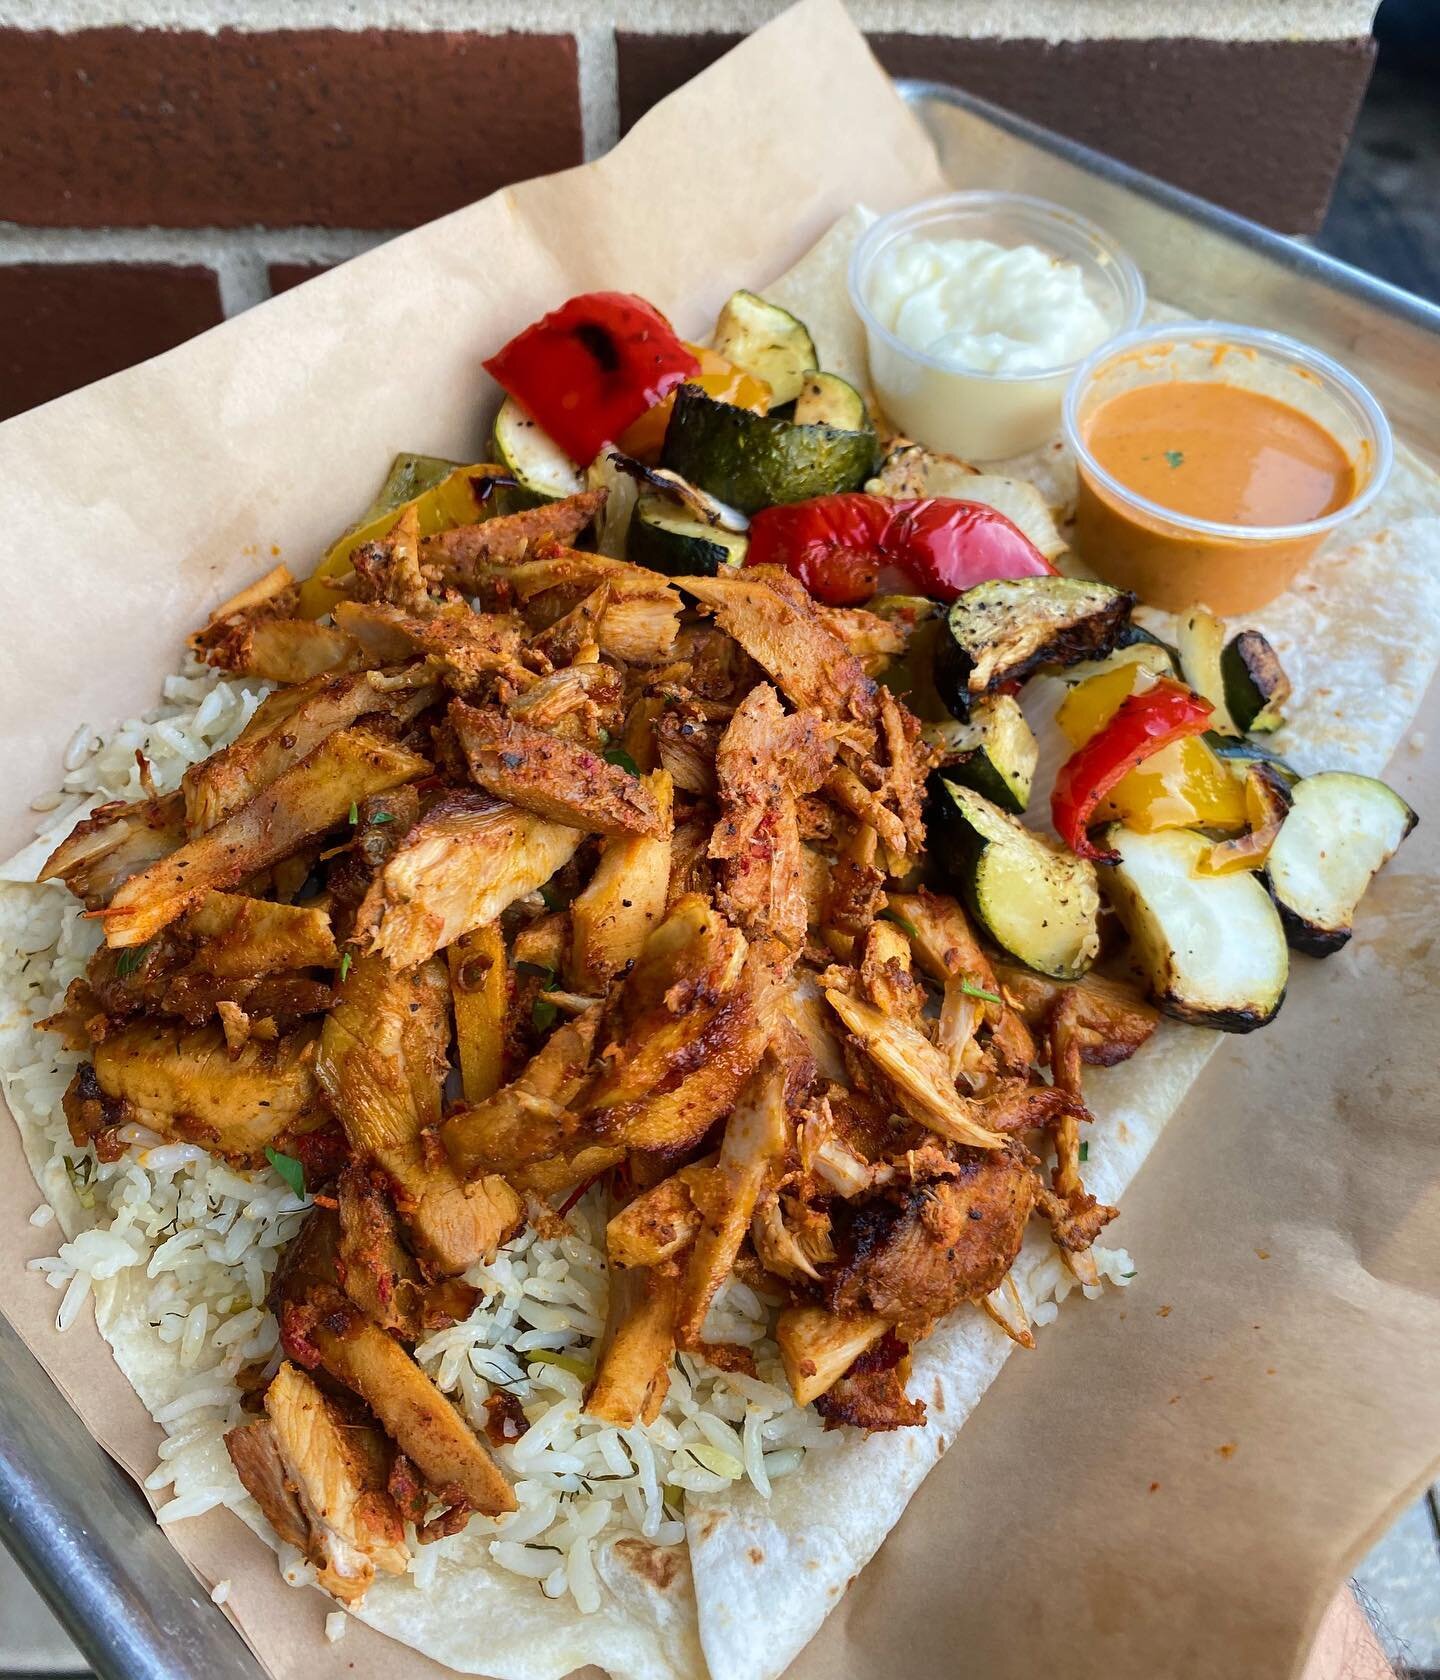 chicken shawarma bowl/plate/dinner/platter/entree. 

Call it what you will - it&rsquo;s 🔥🔥🔥🔥

Served w house made sauces - spicy tahini (orange) &amp; whipped garlic sauce (white).

#shawarma #shawarmalovers #eeeeeats #infatuationchi #garlicsauce